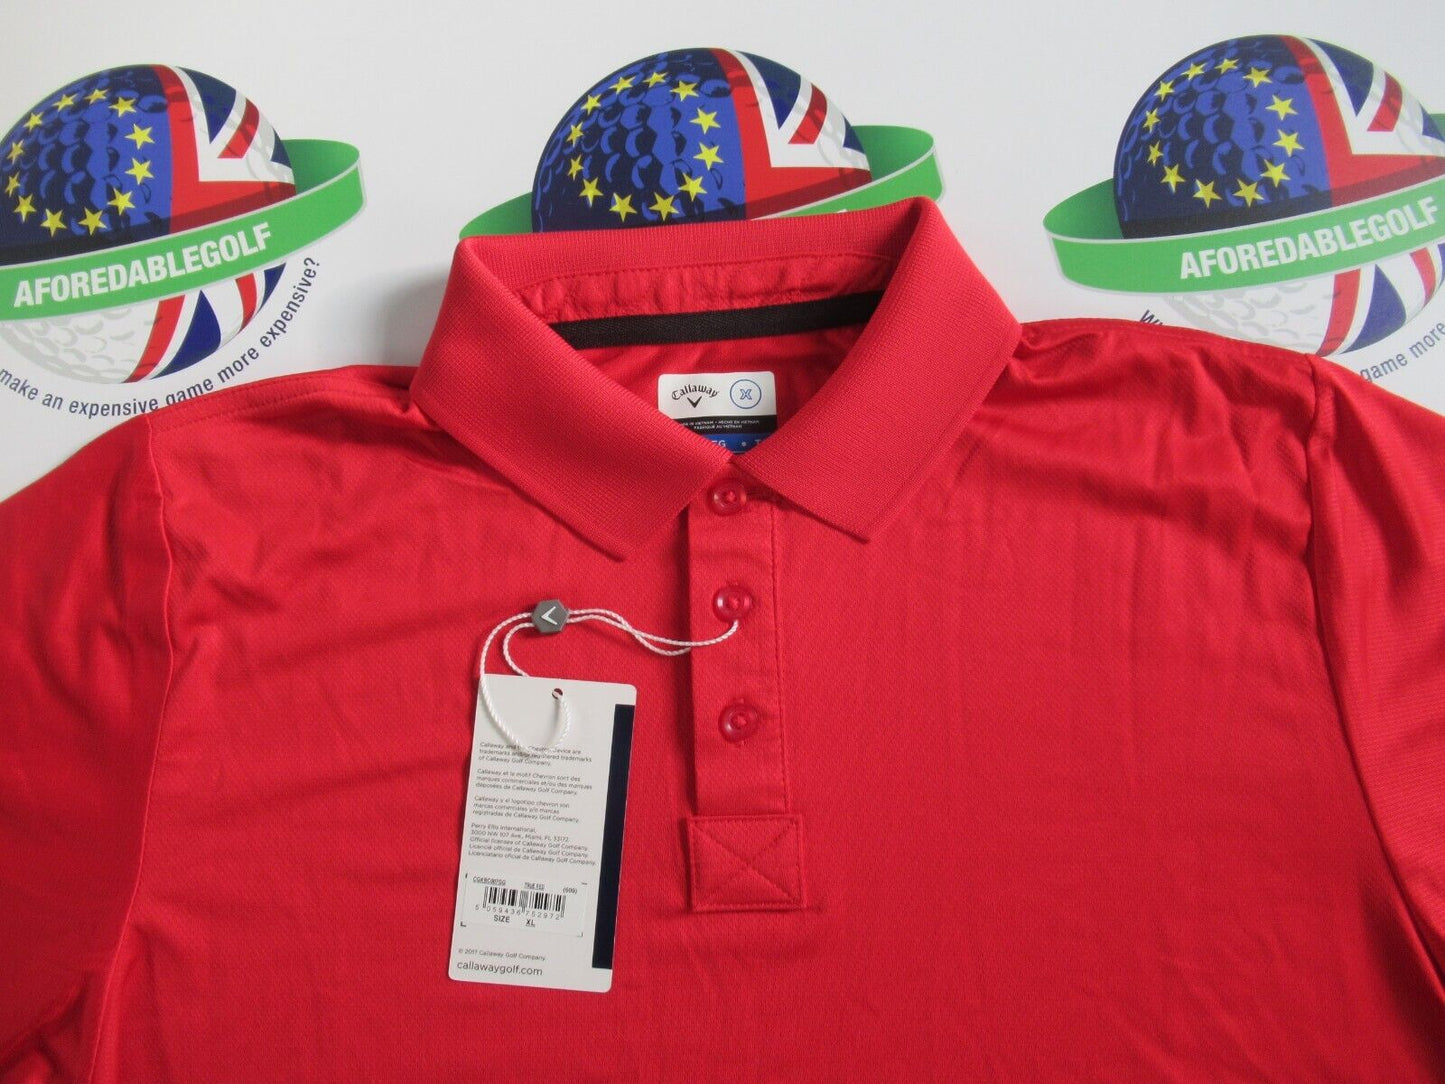 callaway x youth red polo shirt uk size xl 160-172cm 14-16 years